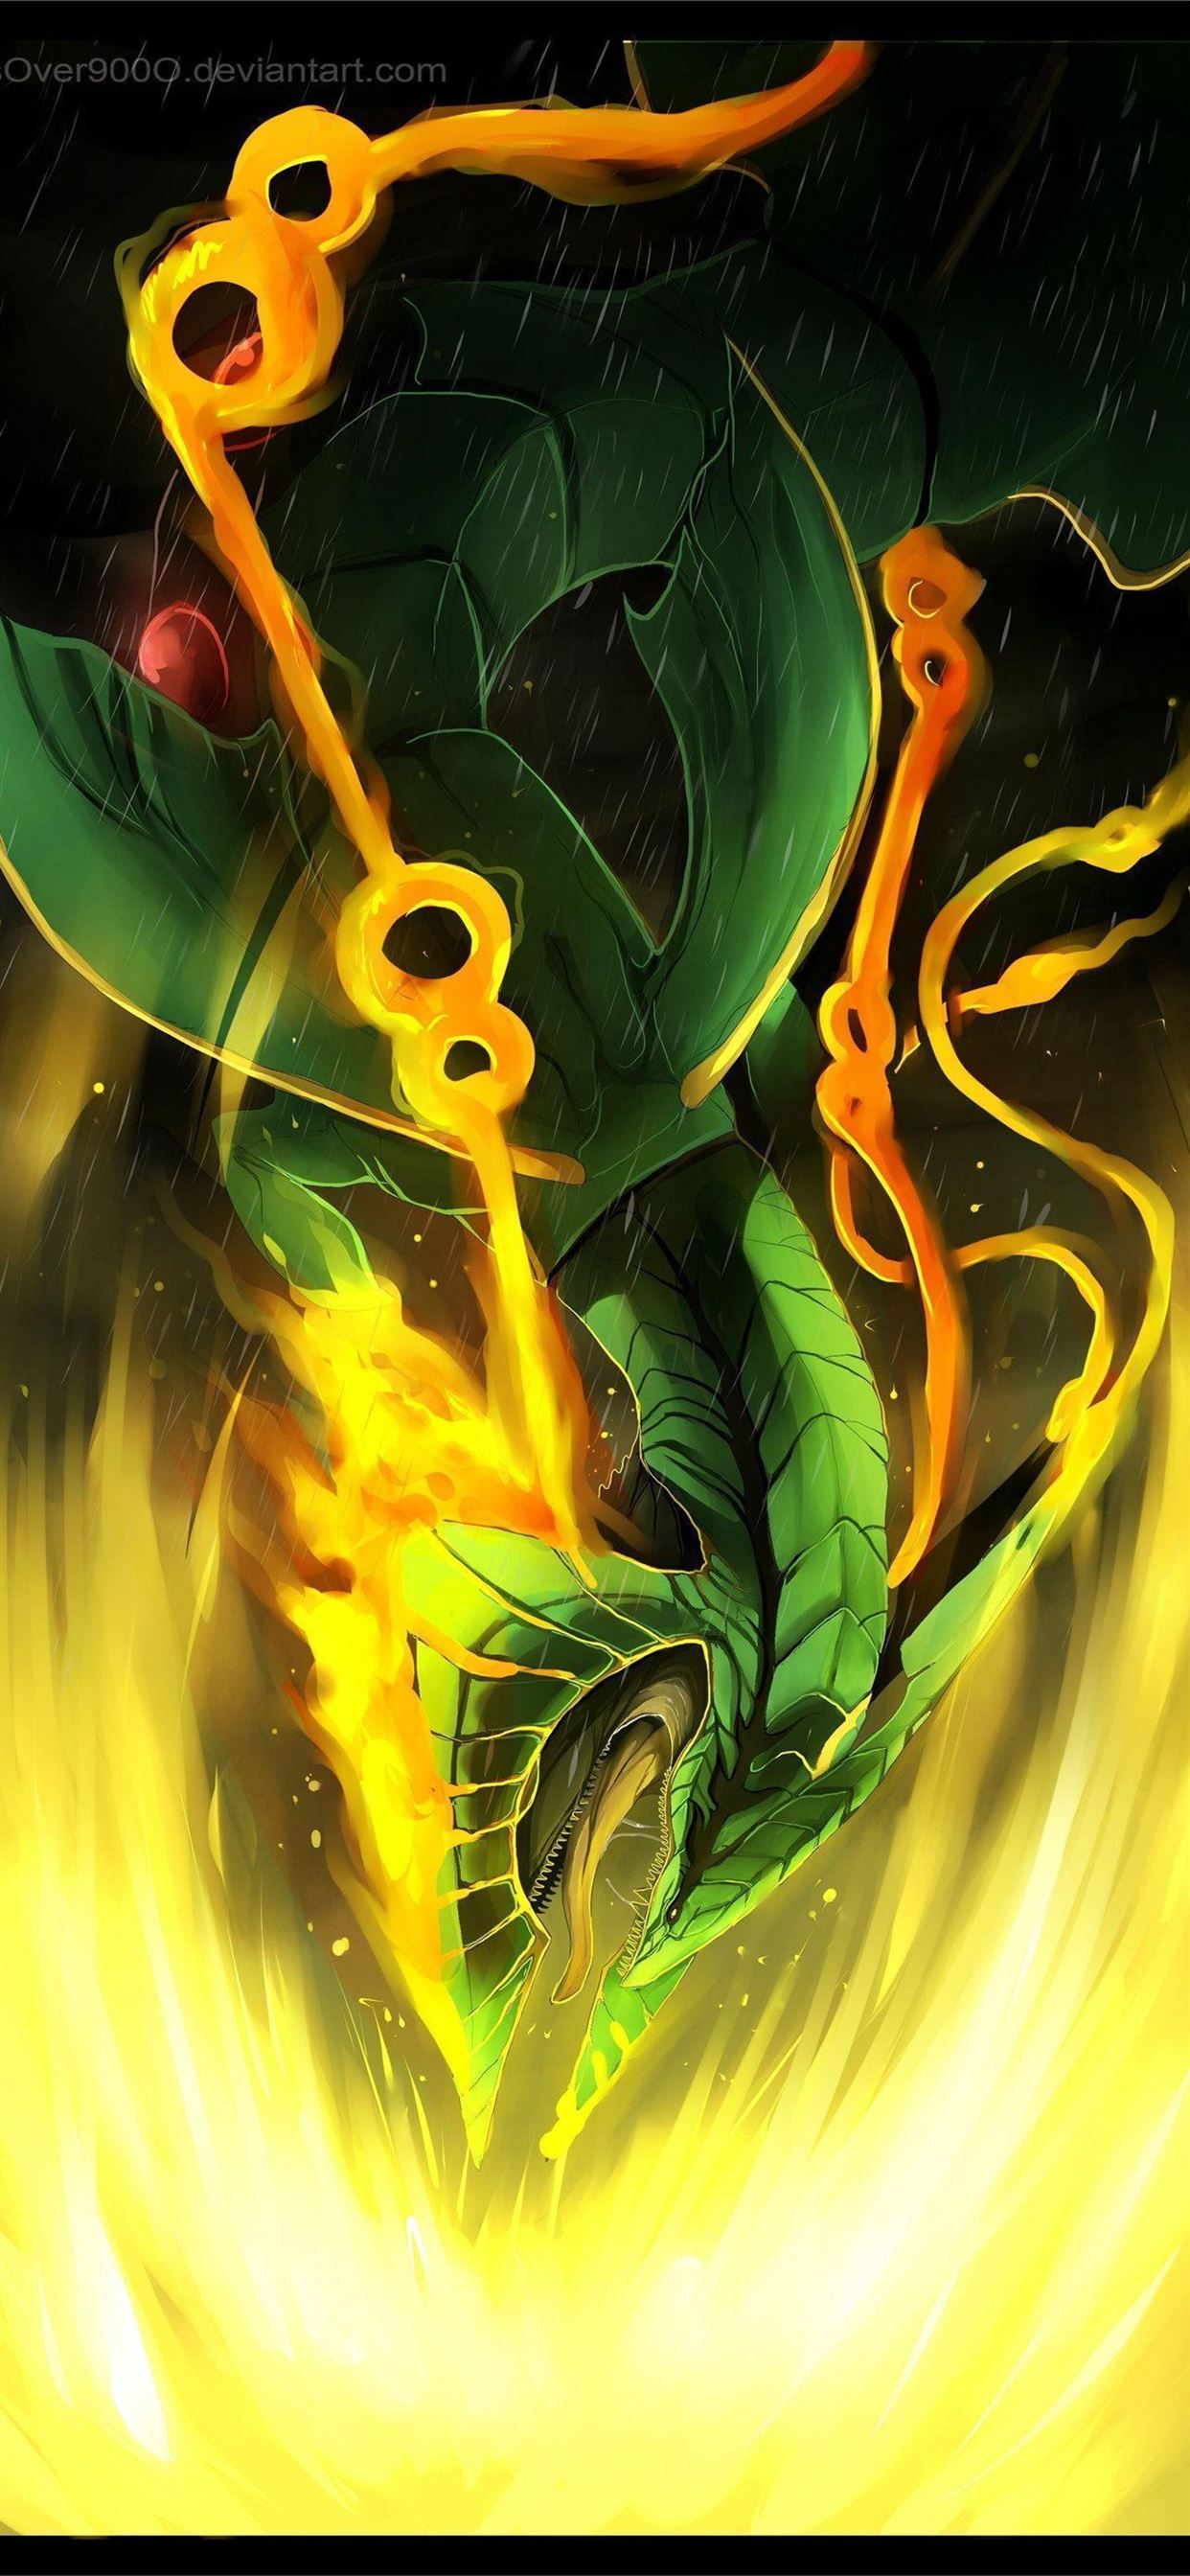 Download Rayquaza Pokémon wallpapers for mobile phone free Rayquaza  Pokémon HD pictures